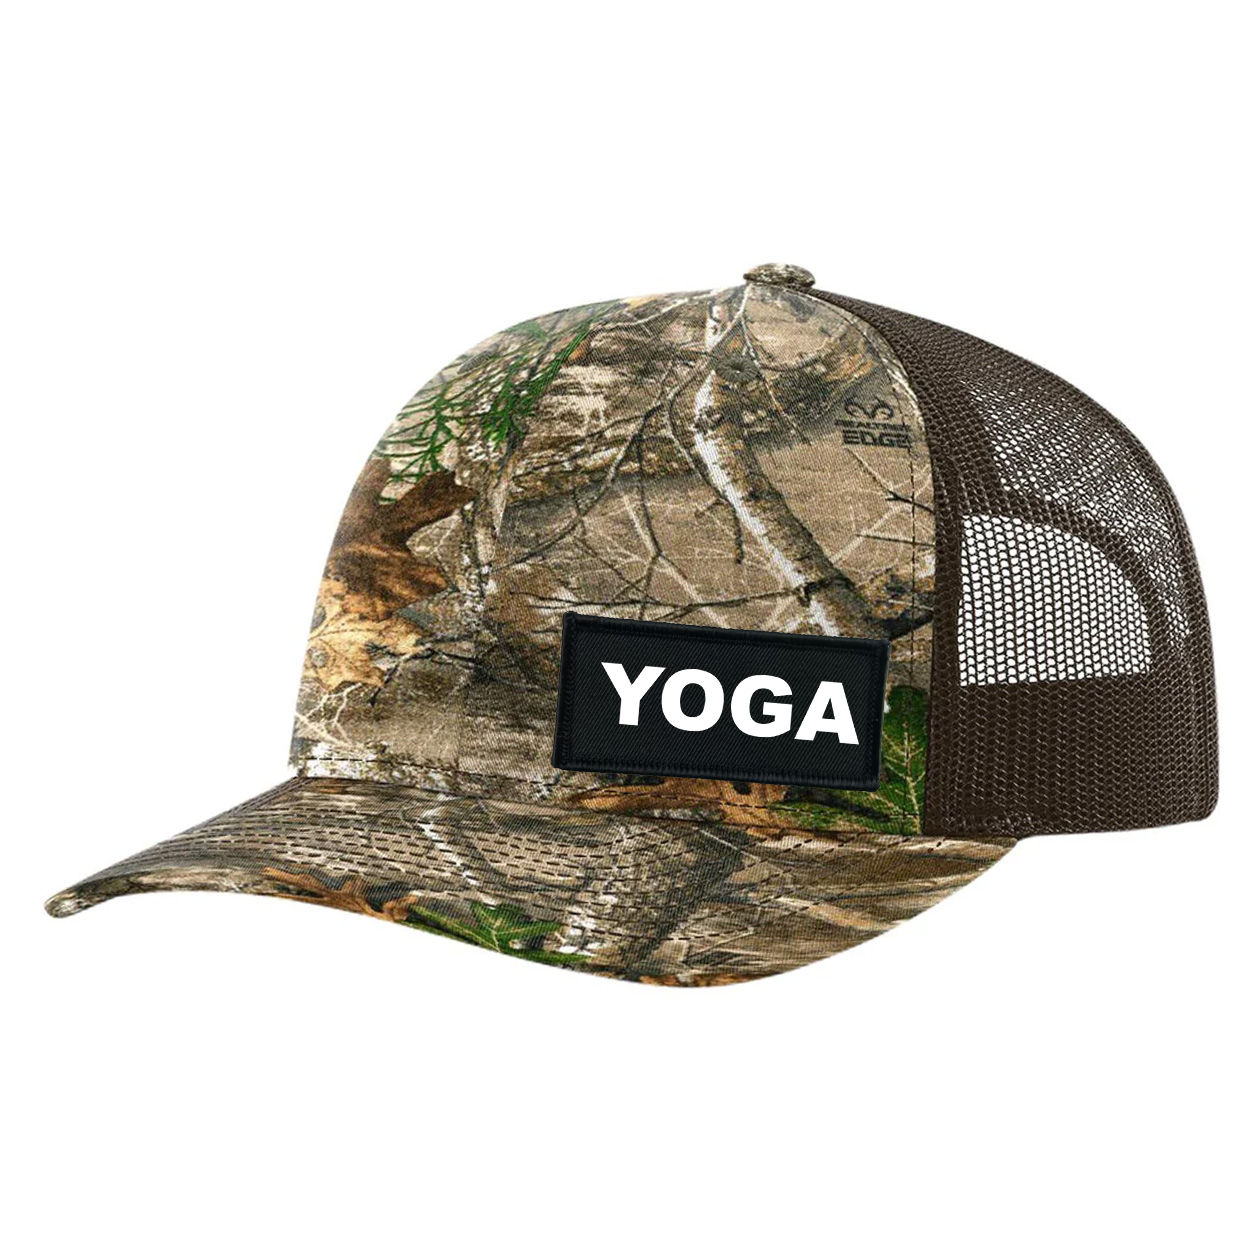 Yoga Brand Logo Night Out Woven Patch Snapback Trucker Hat Realtree Edge/ Brown